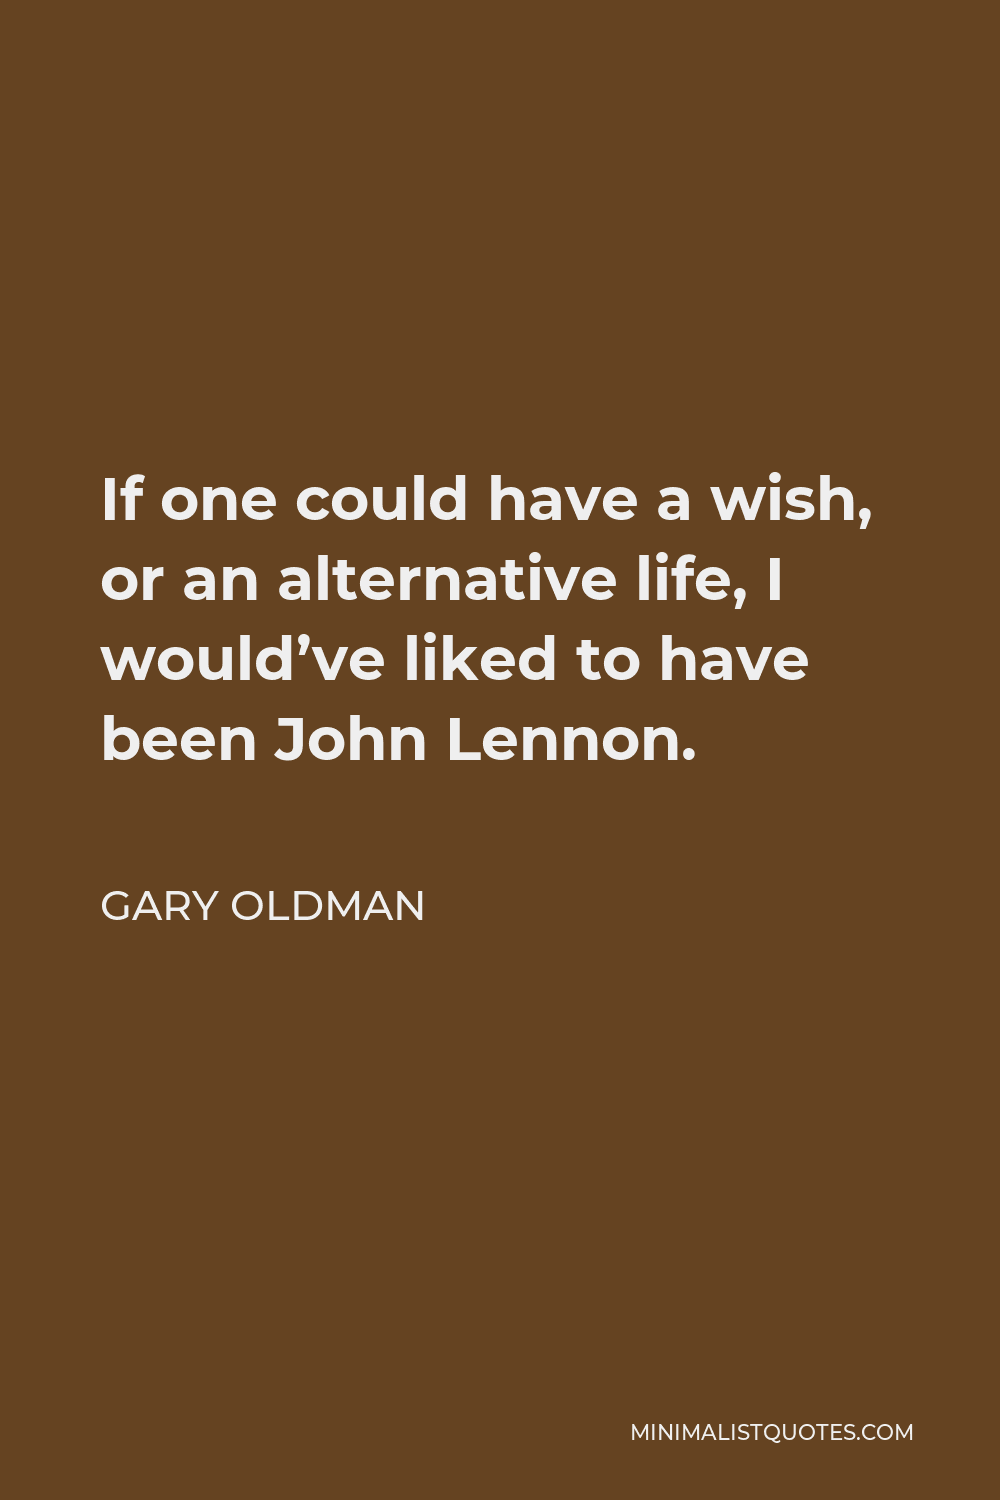 Gary Oldman Quote - If one could have a wish, or an alternative life, I would’ve liked to have been John Lennon.